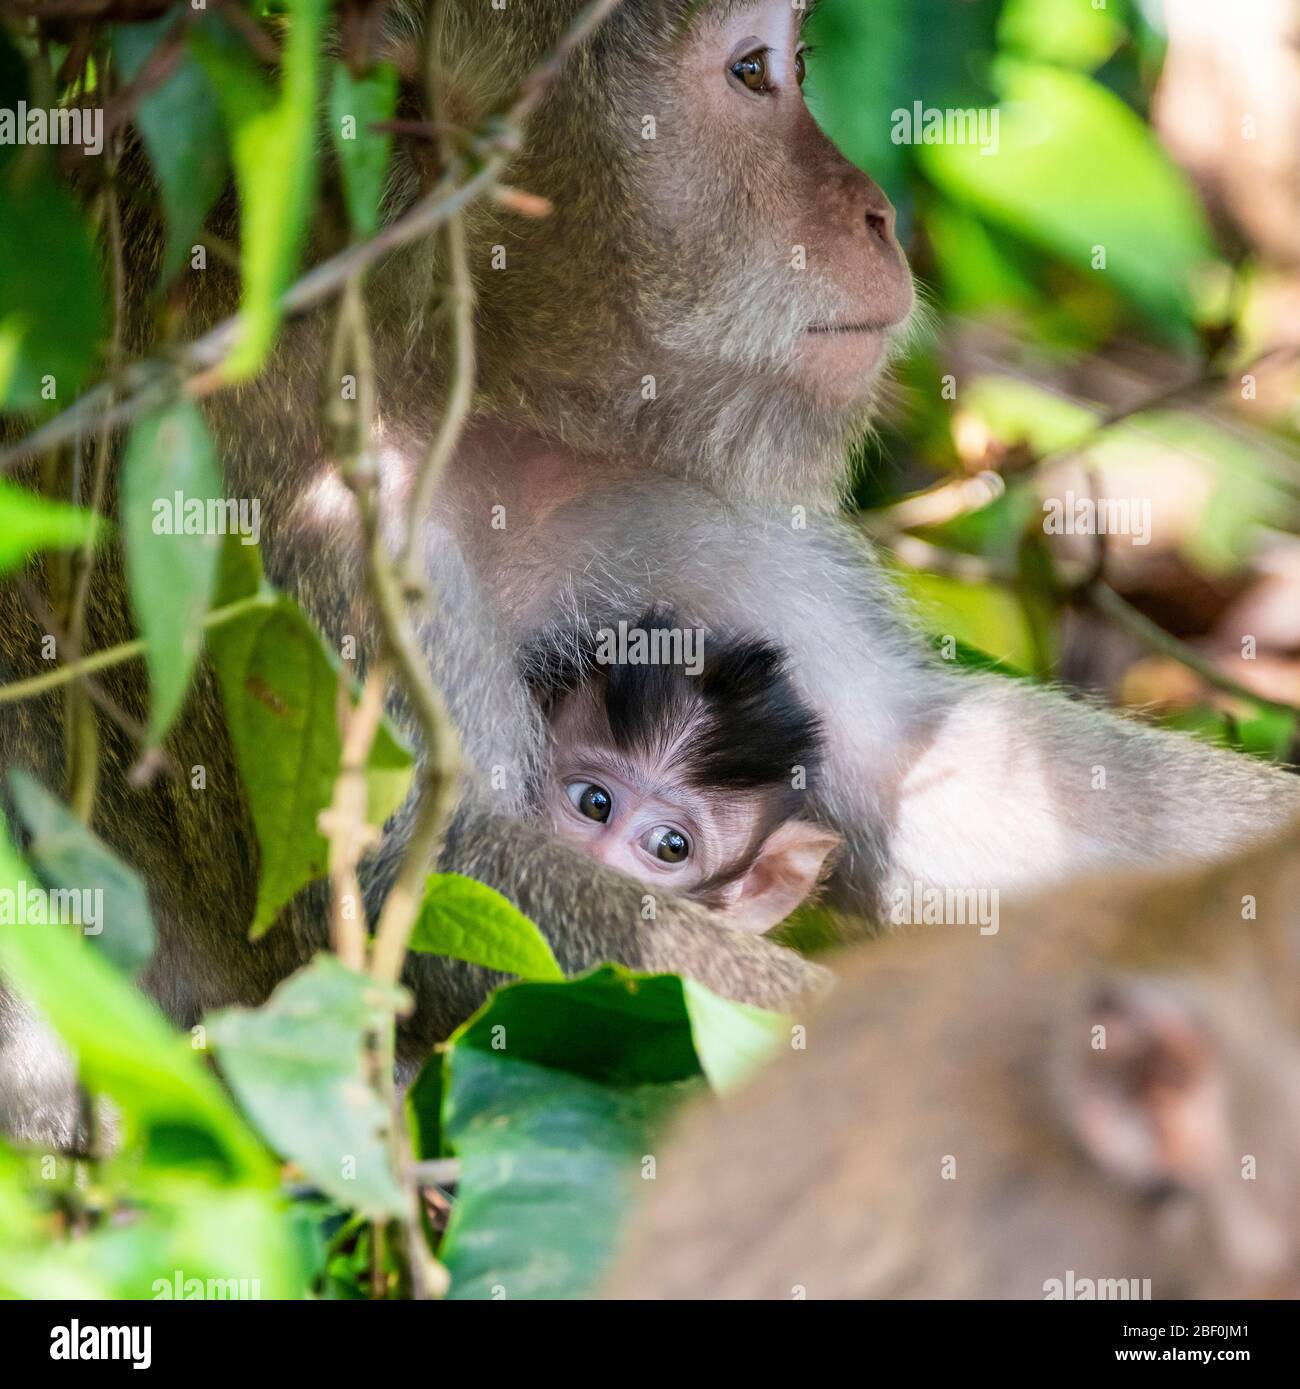 Square view of a baby and mother grey long-tailed macaque in Bali, Indonesia. Stock Photo